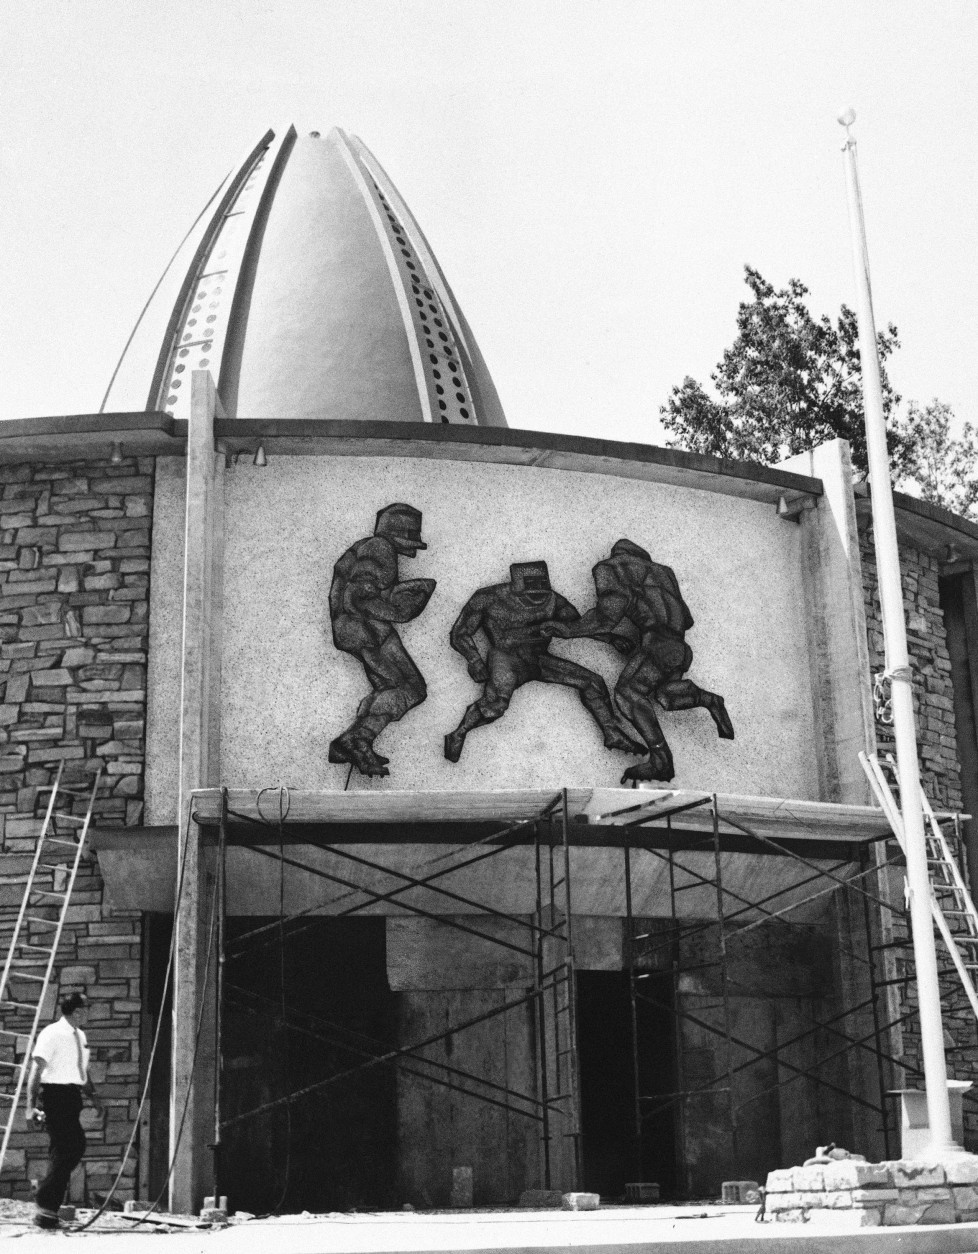 On this date in 1963, the National Professional Football Hall of Fame was dedicated in Canton, Ohio. (AP Photo)